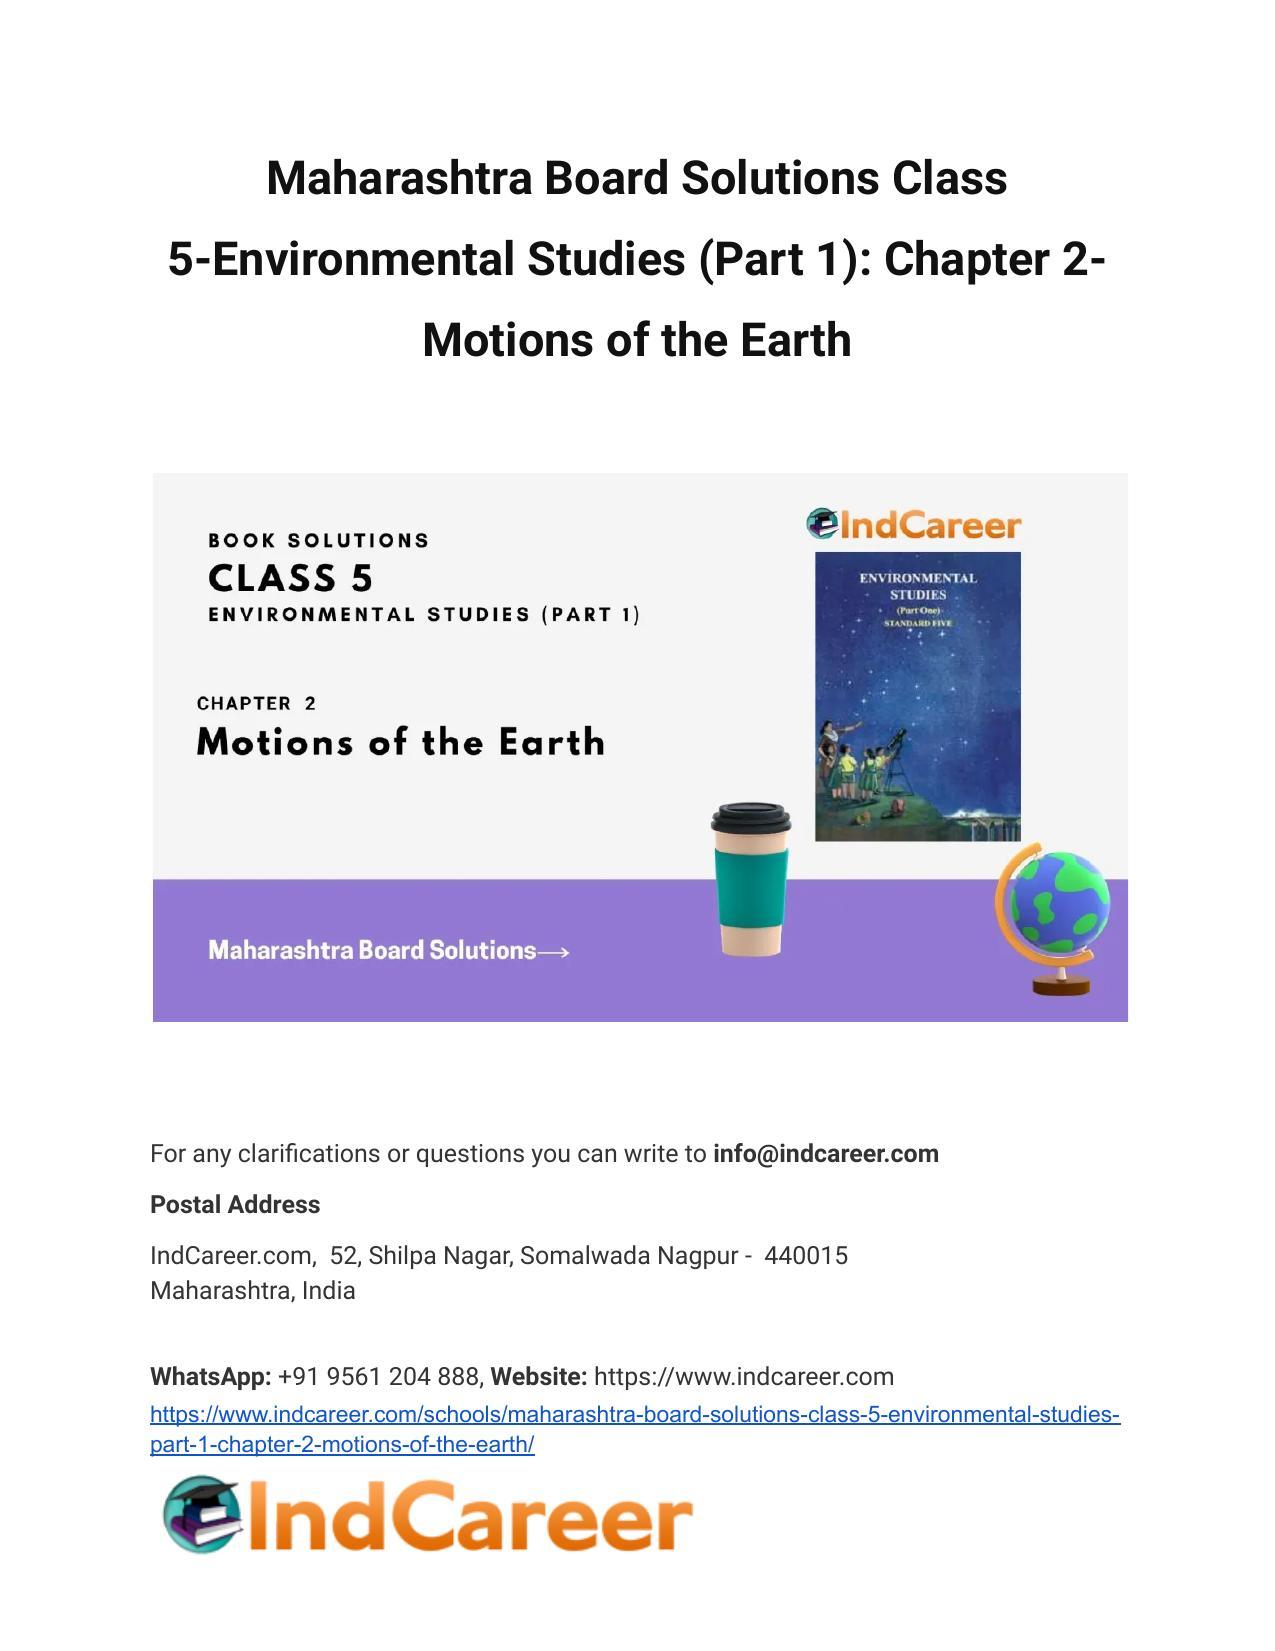 Maharashtra Board Solutions Class 5-Environmental Studies (Part 1): Chapter 2- Motions of the Earth - Page 1